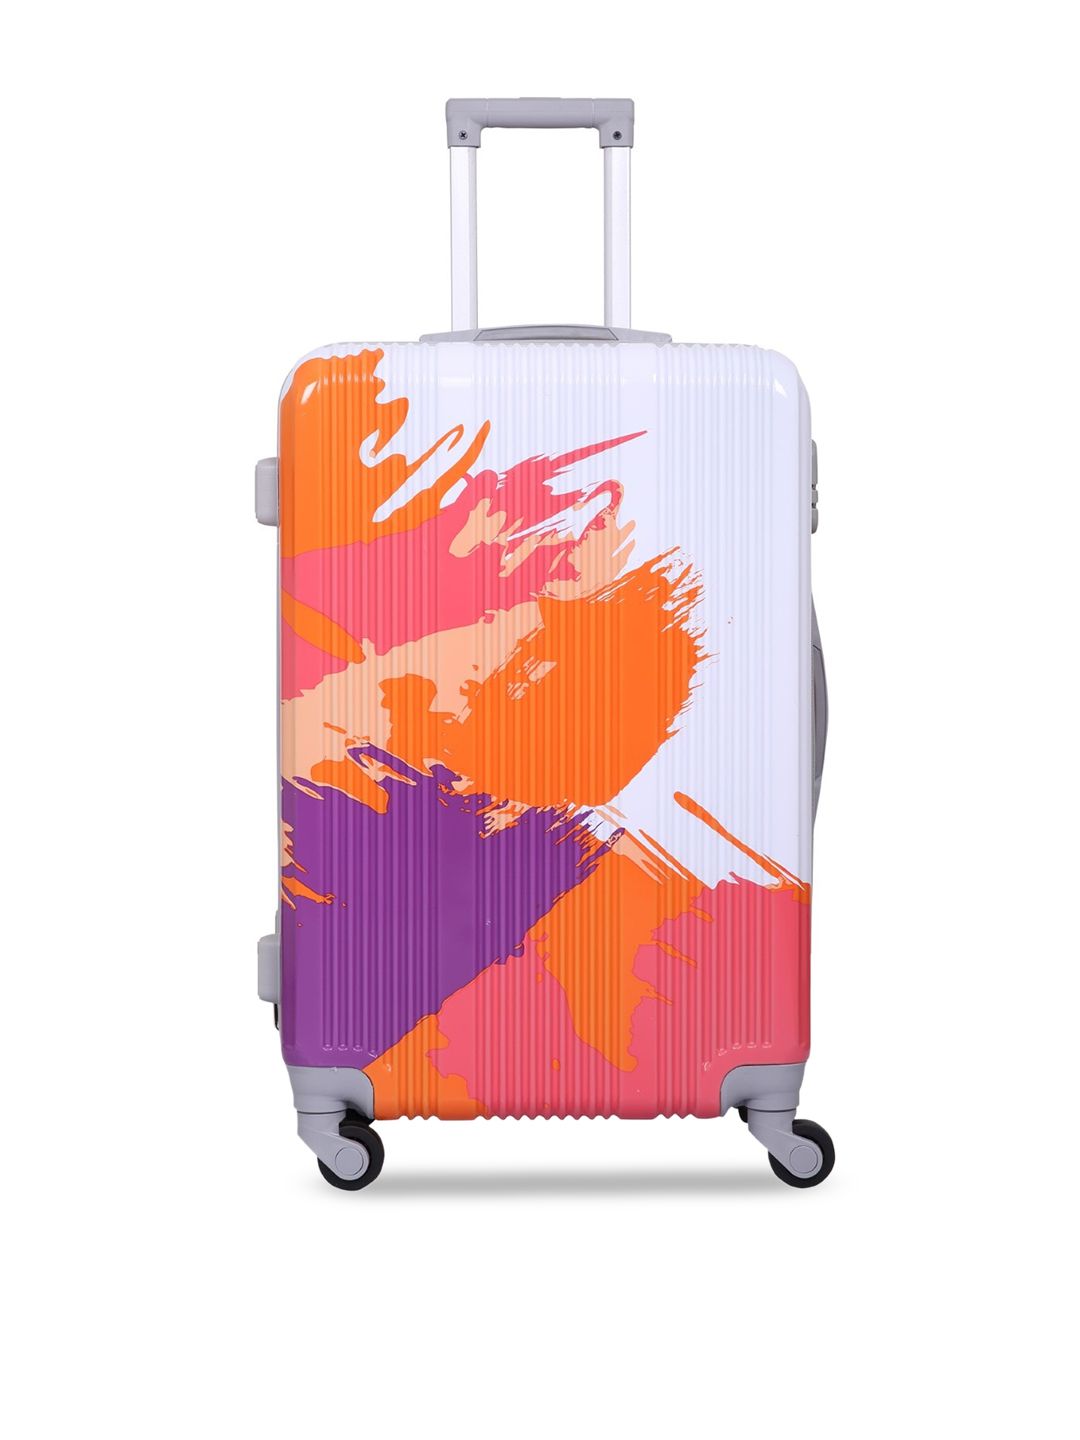 Polo Class Orange & White Printed Hard Sided Trolley Bag - Small Price in India